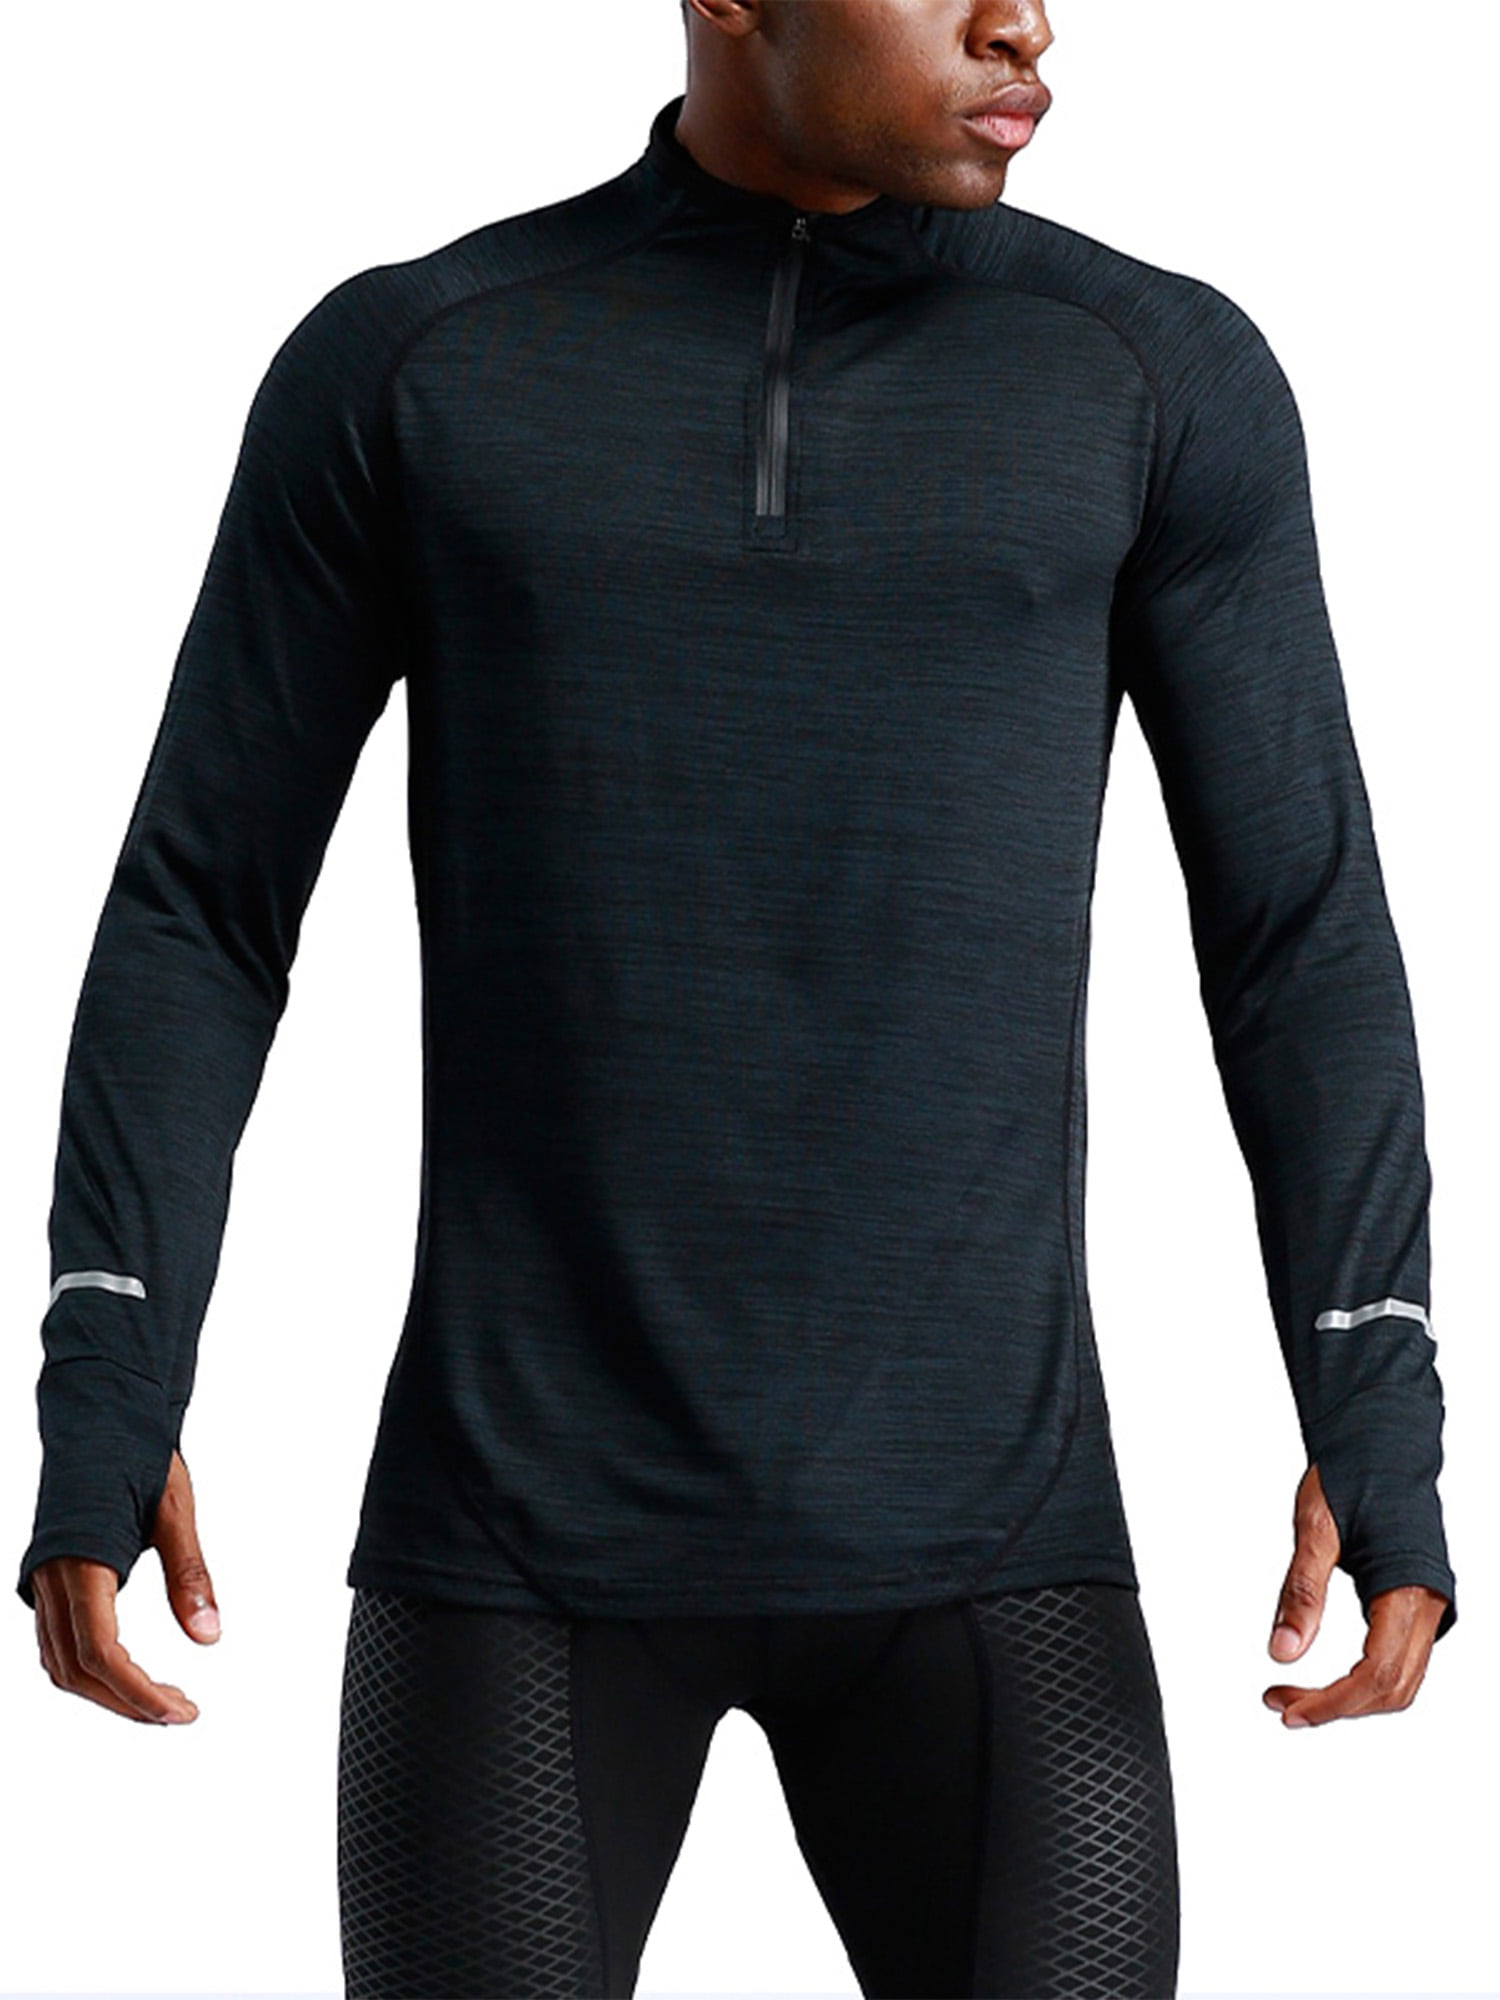 Men's Compression T-Shirt Zipper Mock Neck Dry fit Top Tight fit Workout Running 